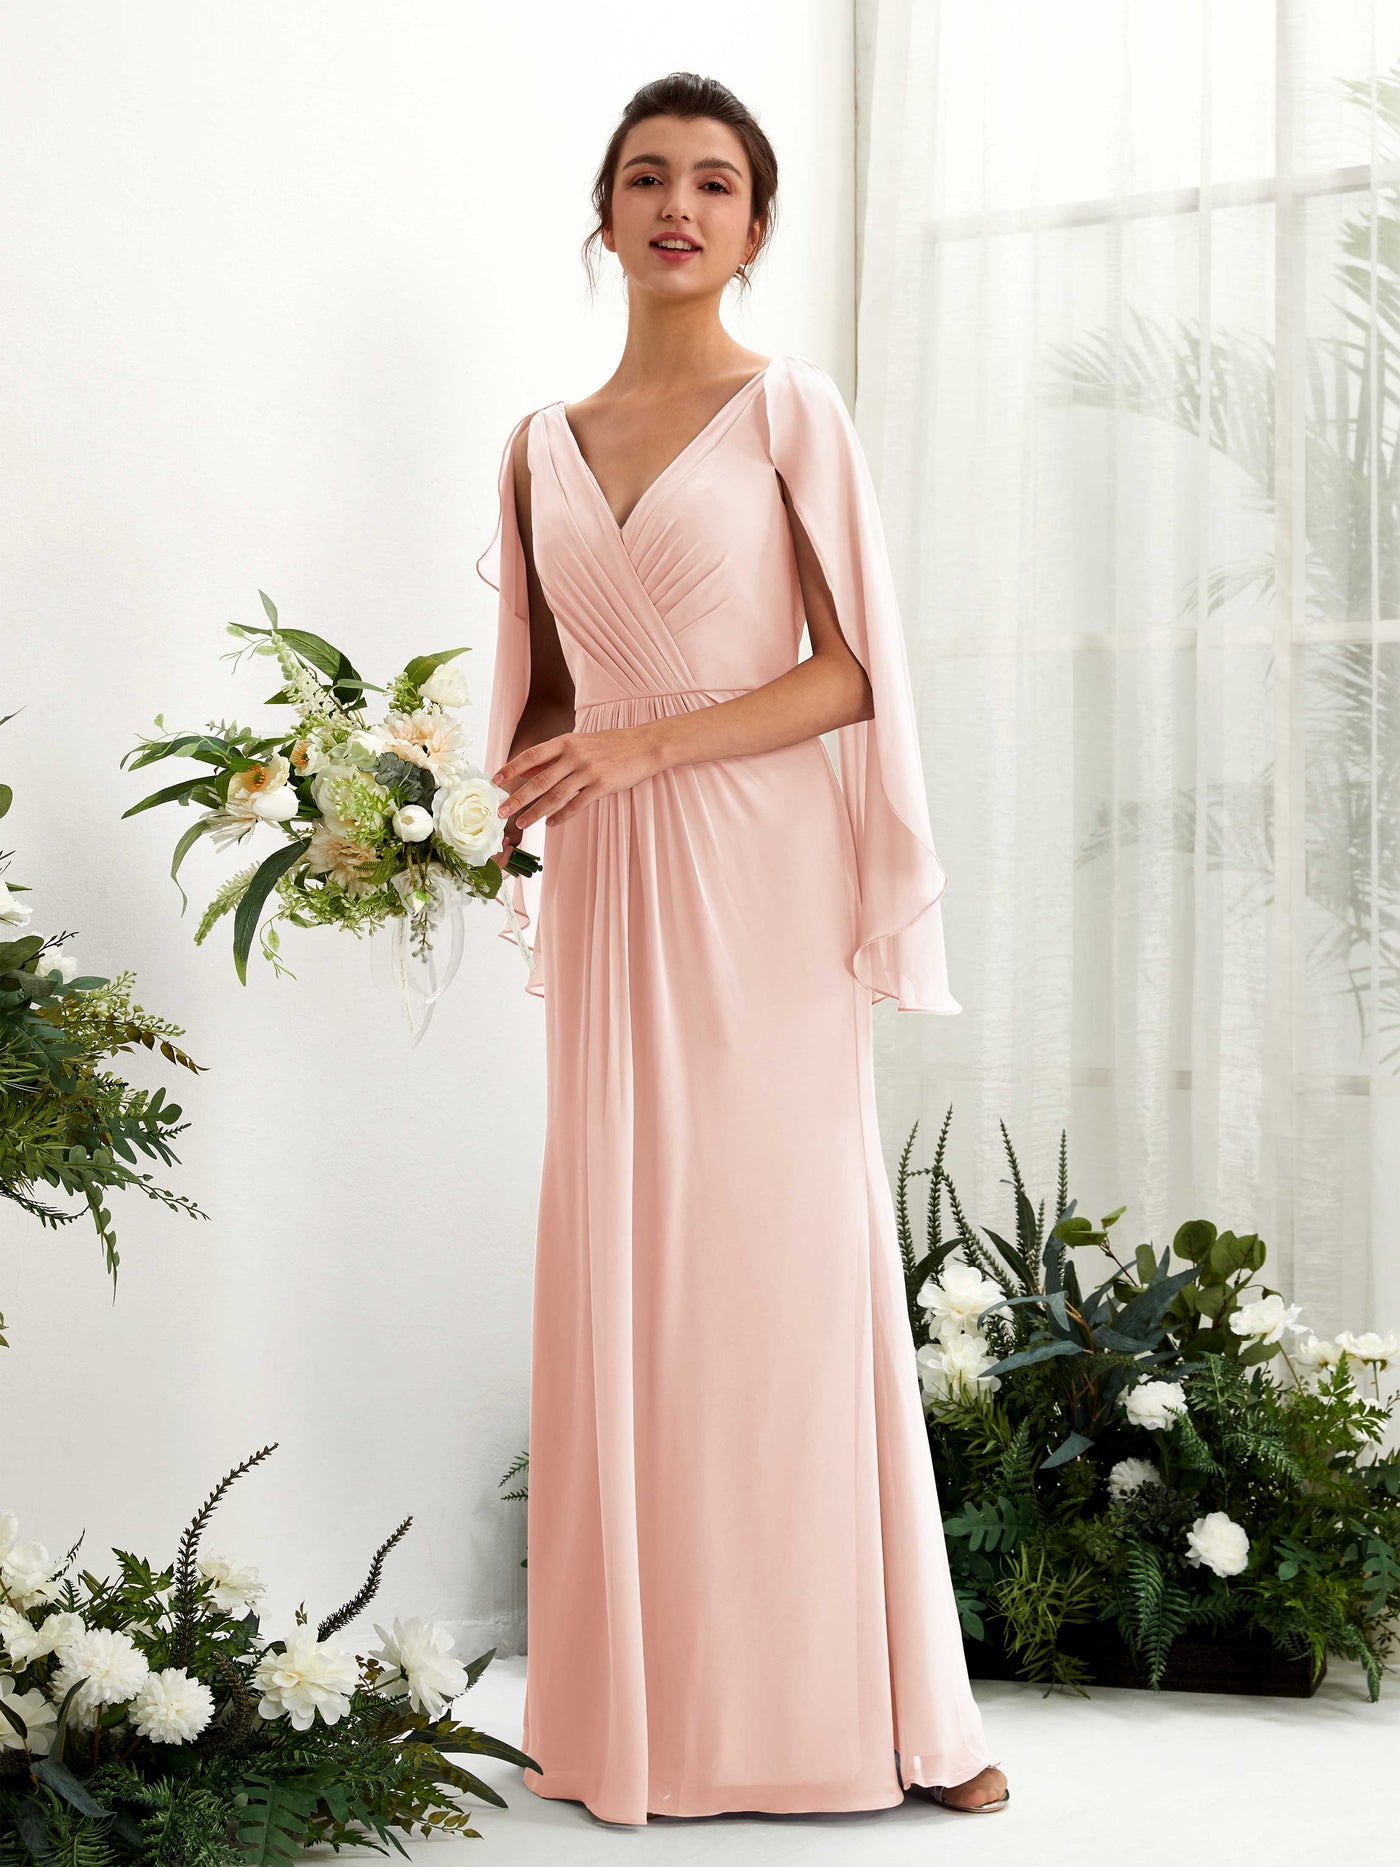 Pearl Pink Bridesmaid Dresses Bridesmaid Dress A-line Chiffon Straps Full Length Long Sleeves Wedding Party Dress (80220108)#color_pearl-pink